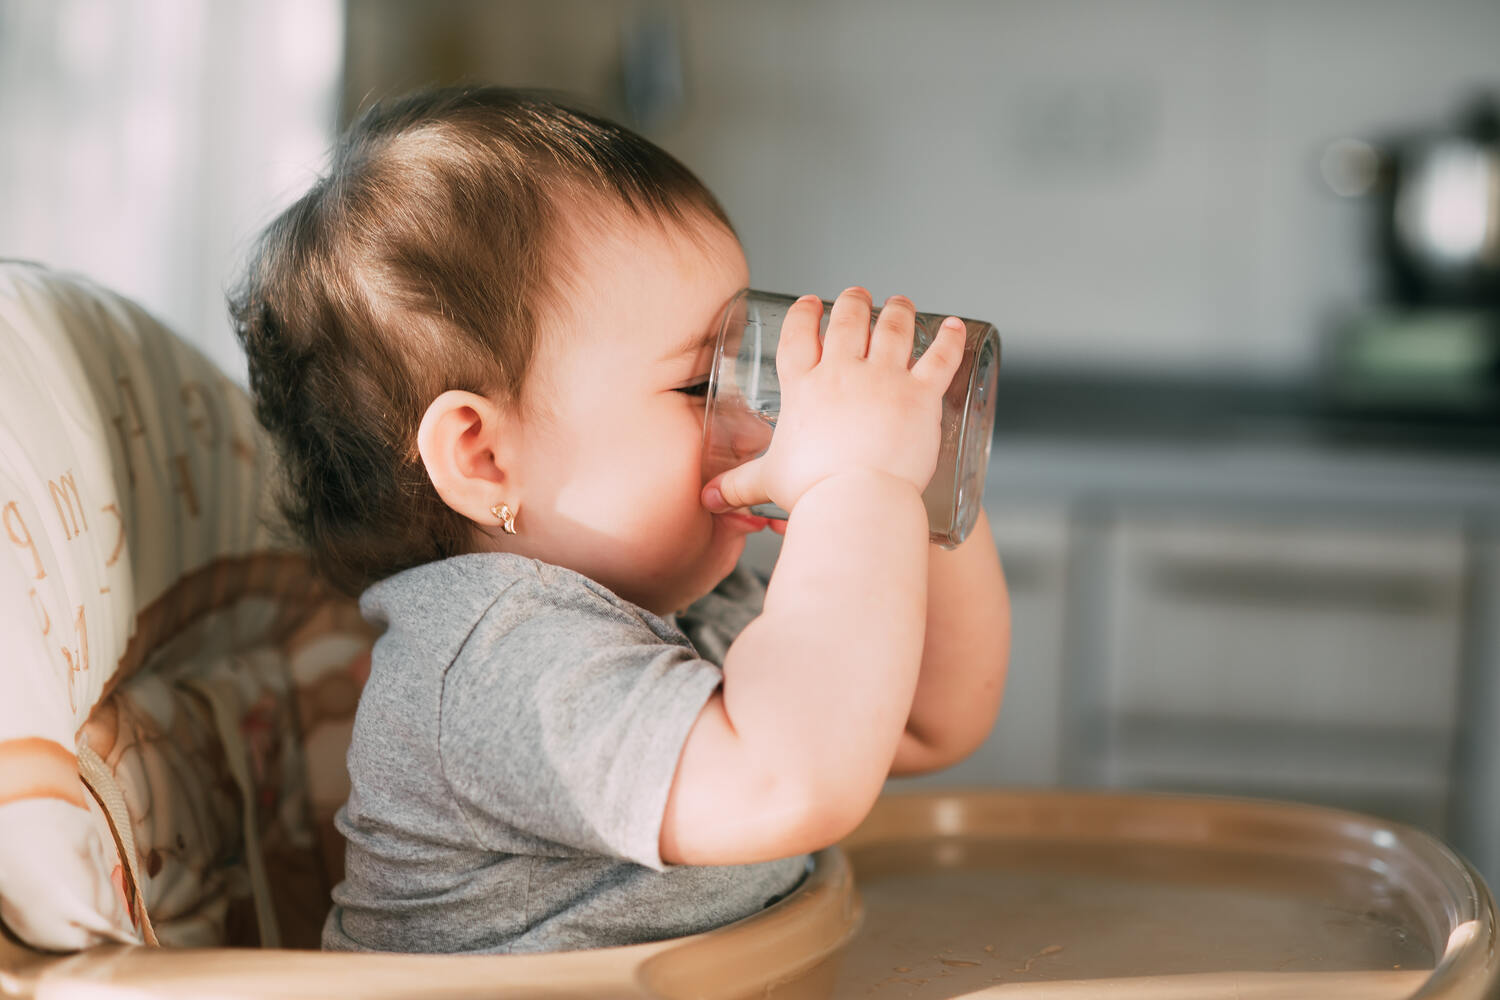 A toddler drinking from open cup